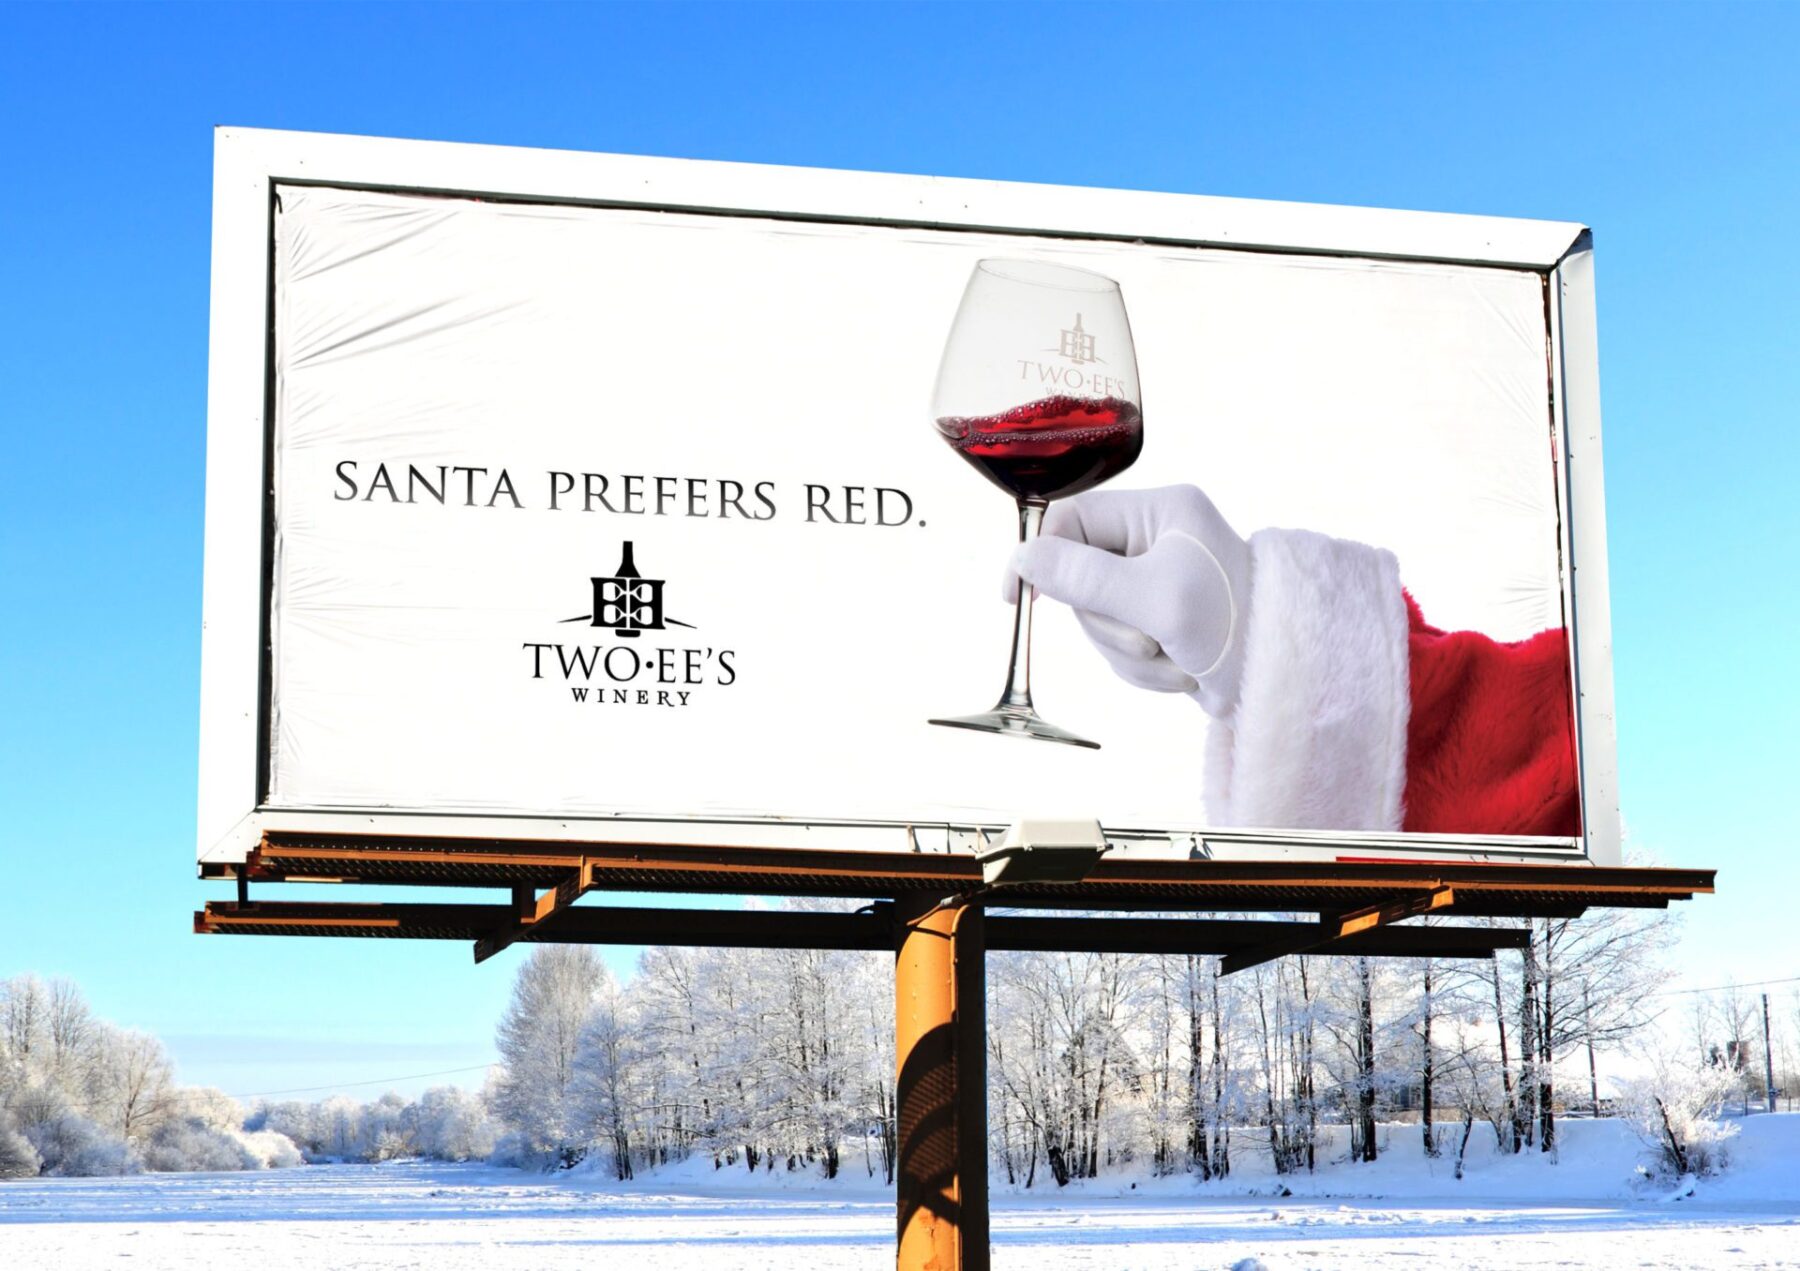 Two EE's Winery. Santa Prefers Red.